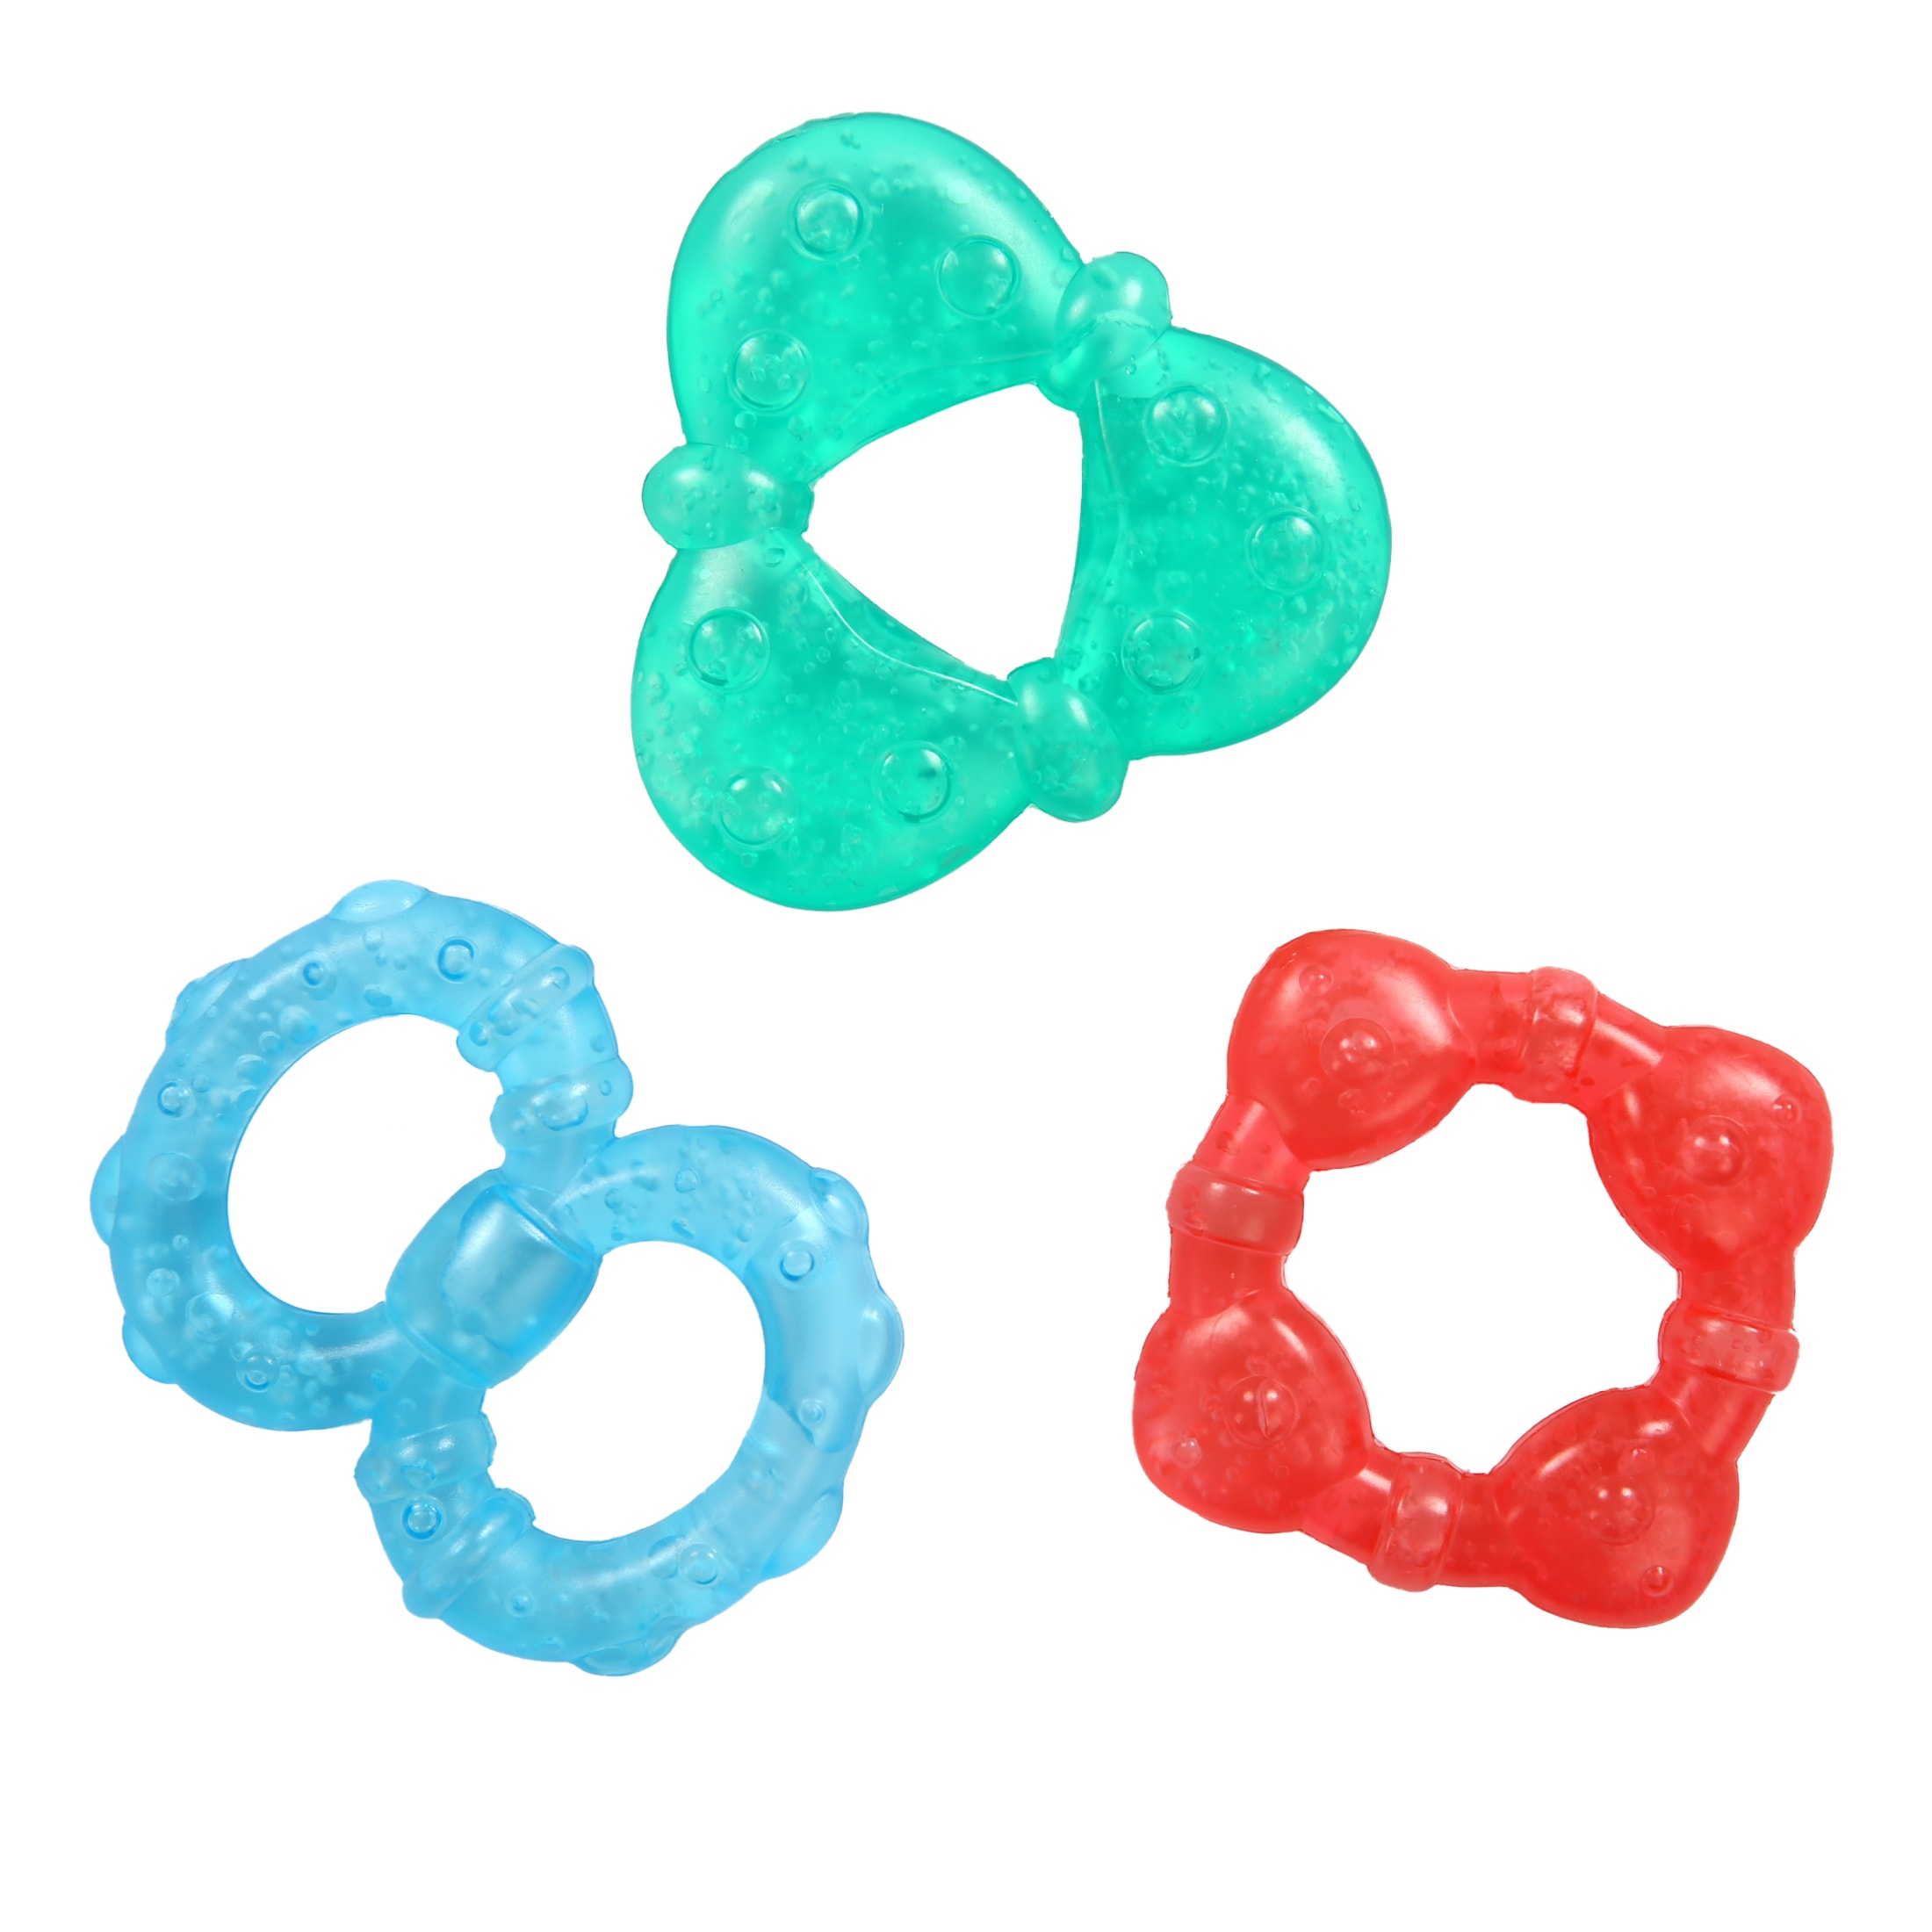 Bright Starts Stay Cool Teethers Gel-Filled 3 Pack, Chillable Teething Baby Toy, Ages 3 months + - image 1 of 10